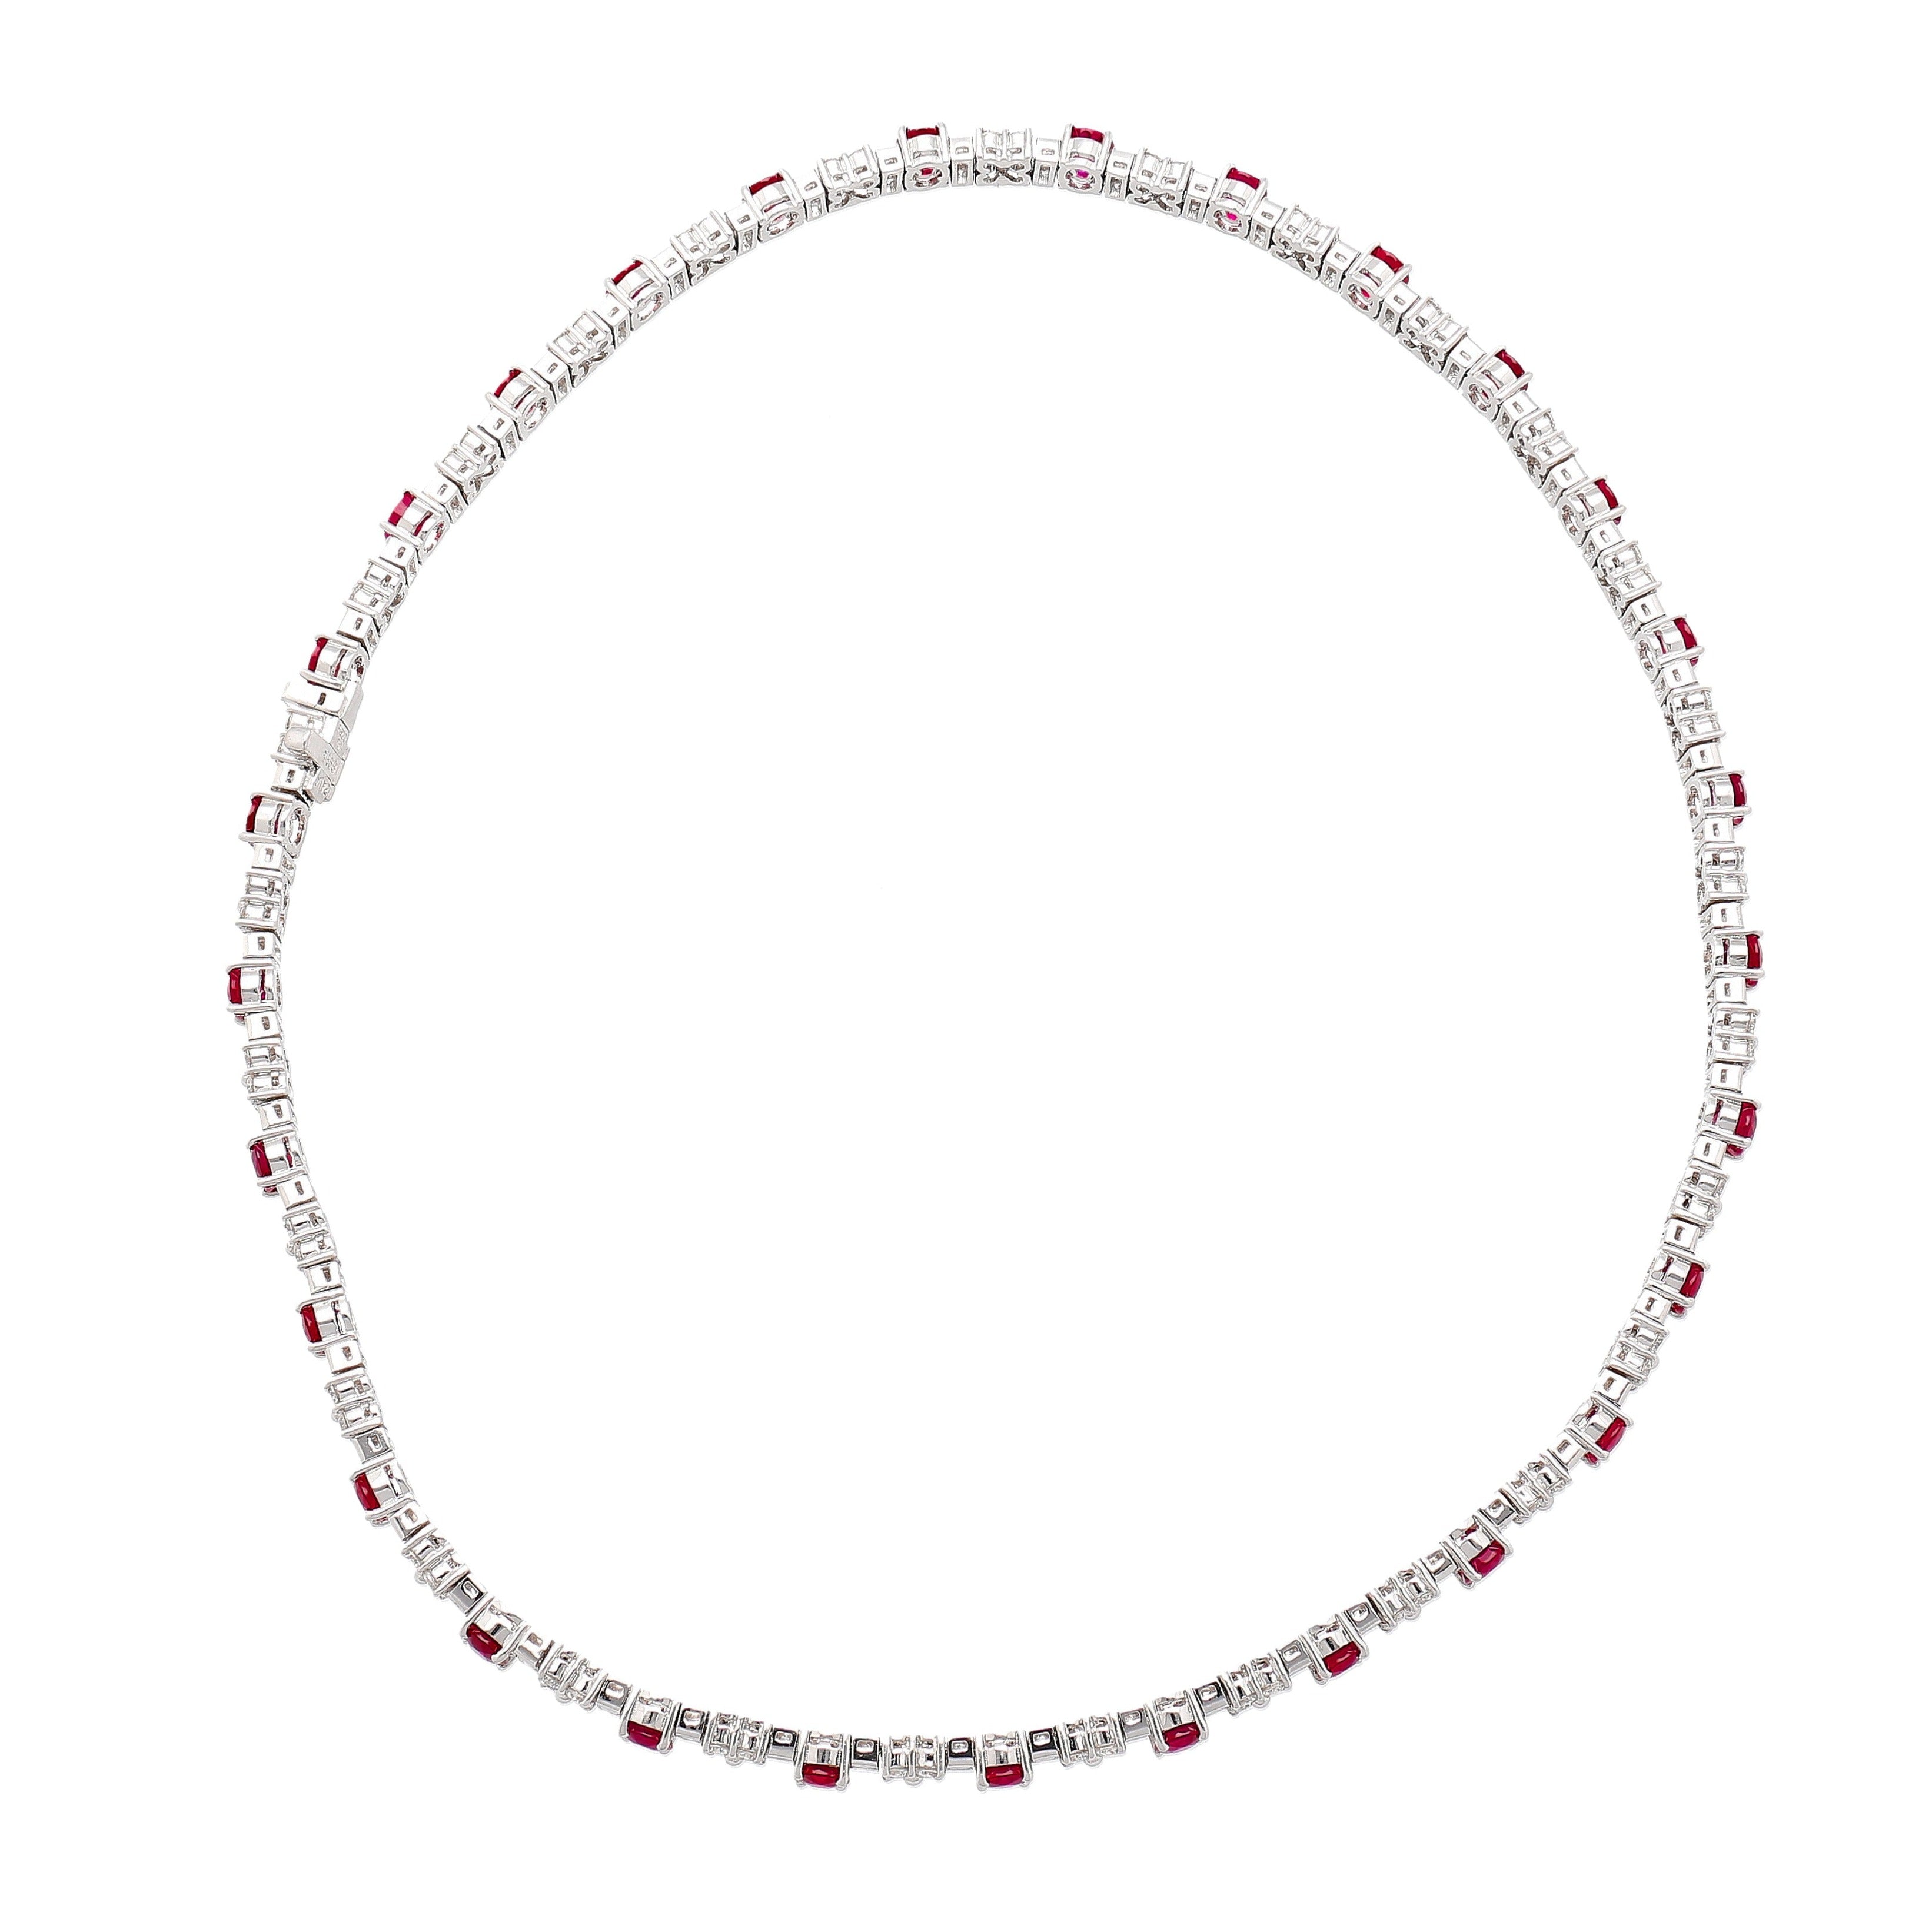 30-Carat-TW-Oval-Cut-Ruby-and-Diamond-Tennis-Necklace-in-Platinum-Necklace-2.jpg